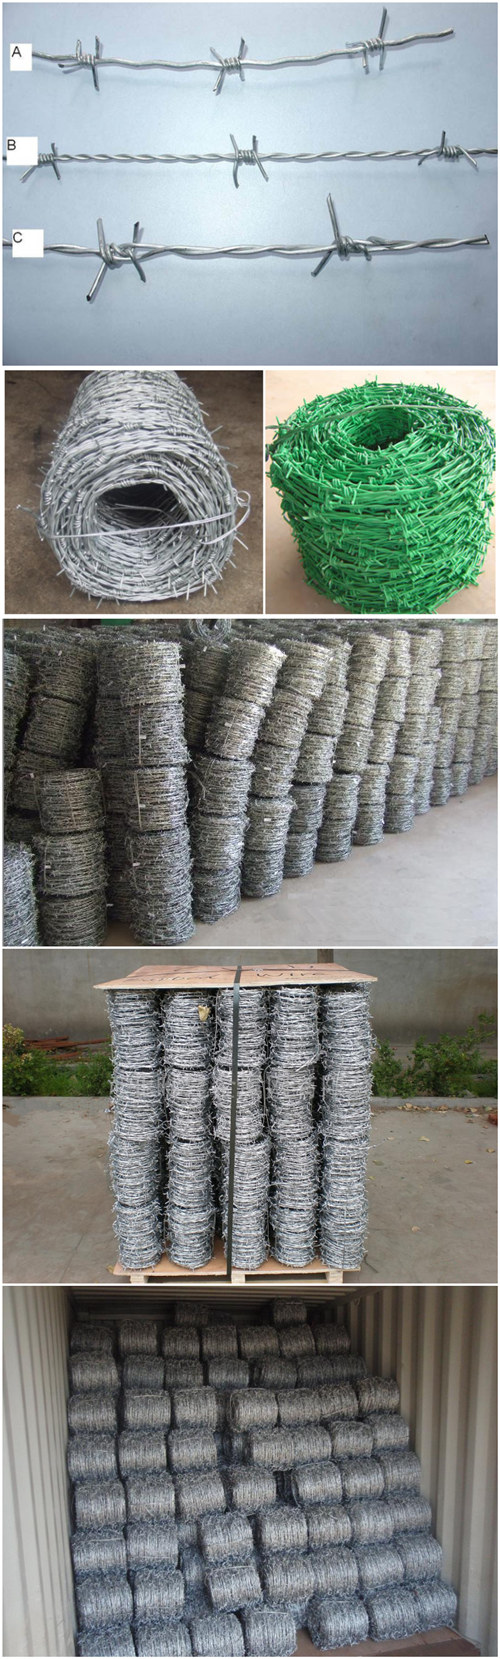 Bwg 16 Barbed Wire Fencing Made in China